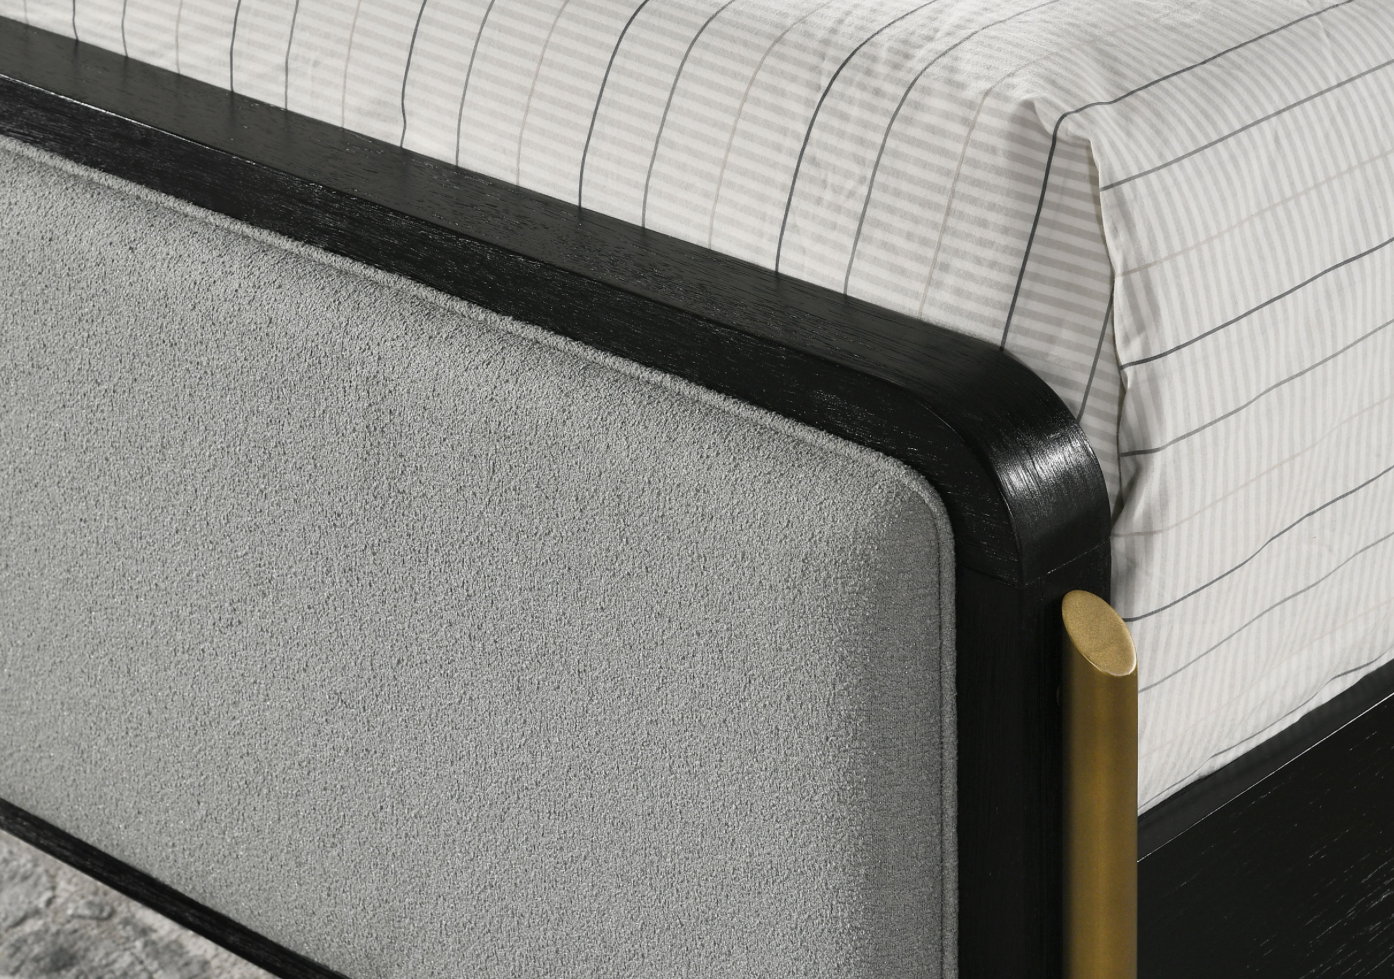 Arini Queen Bed With Upholstered Headboard Black And Grey